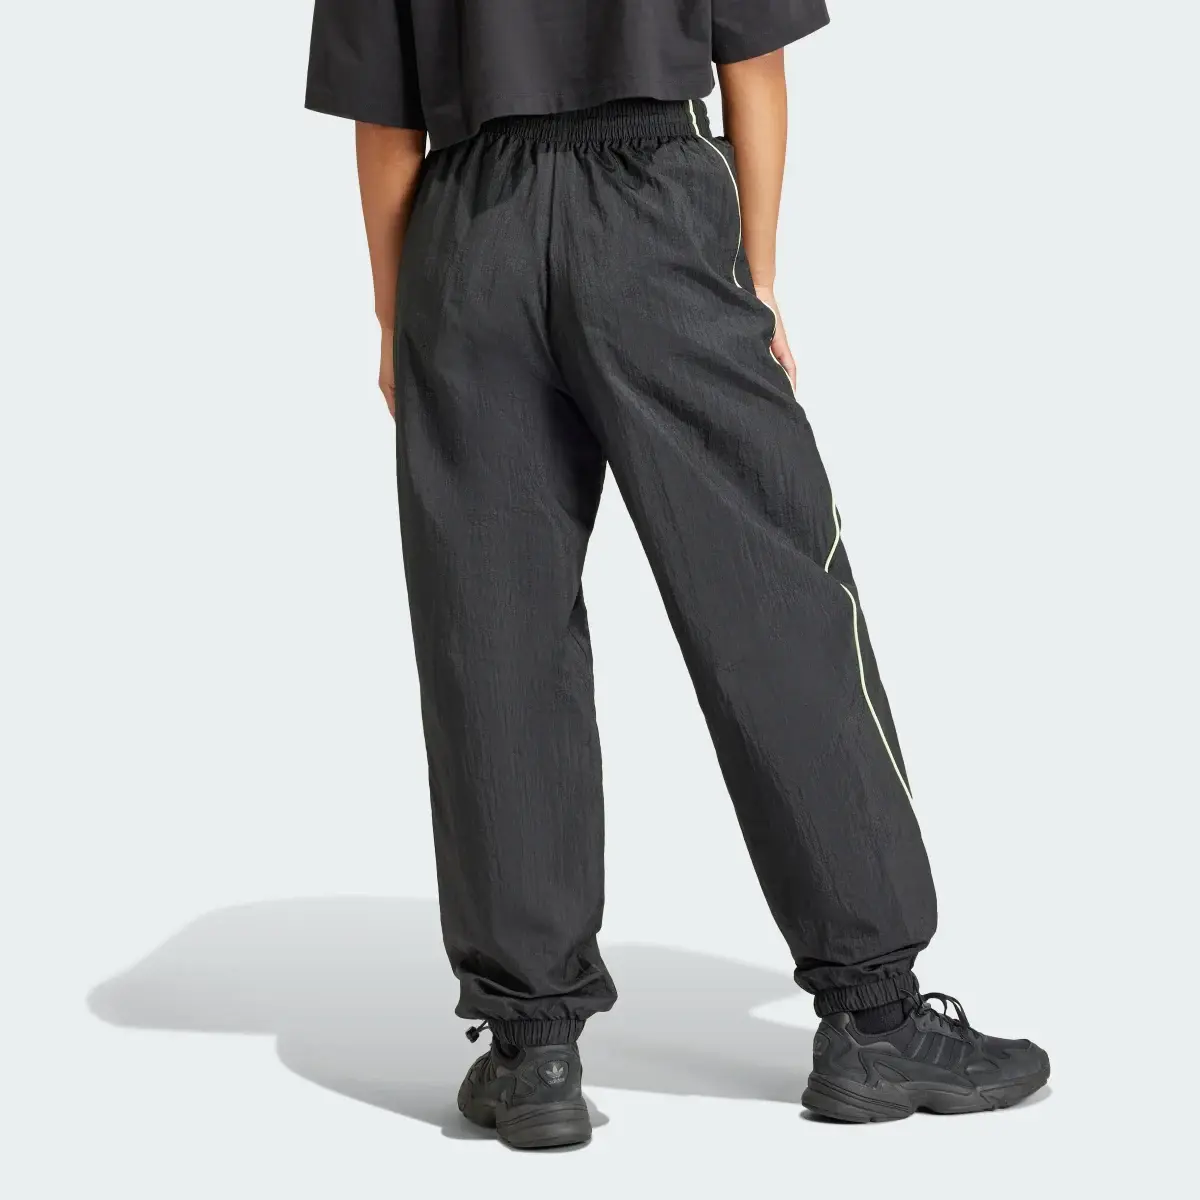 Adidas Loose Parachute Trousers. 2